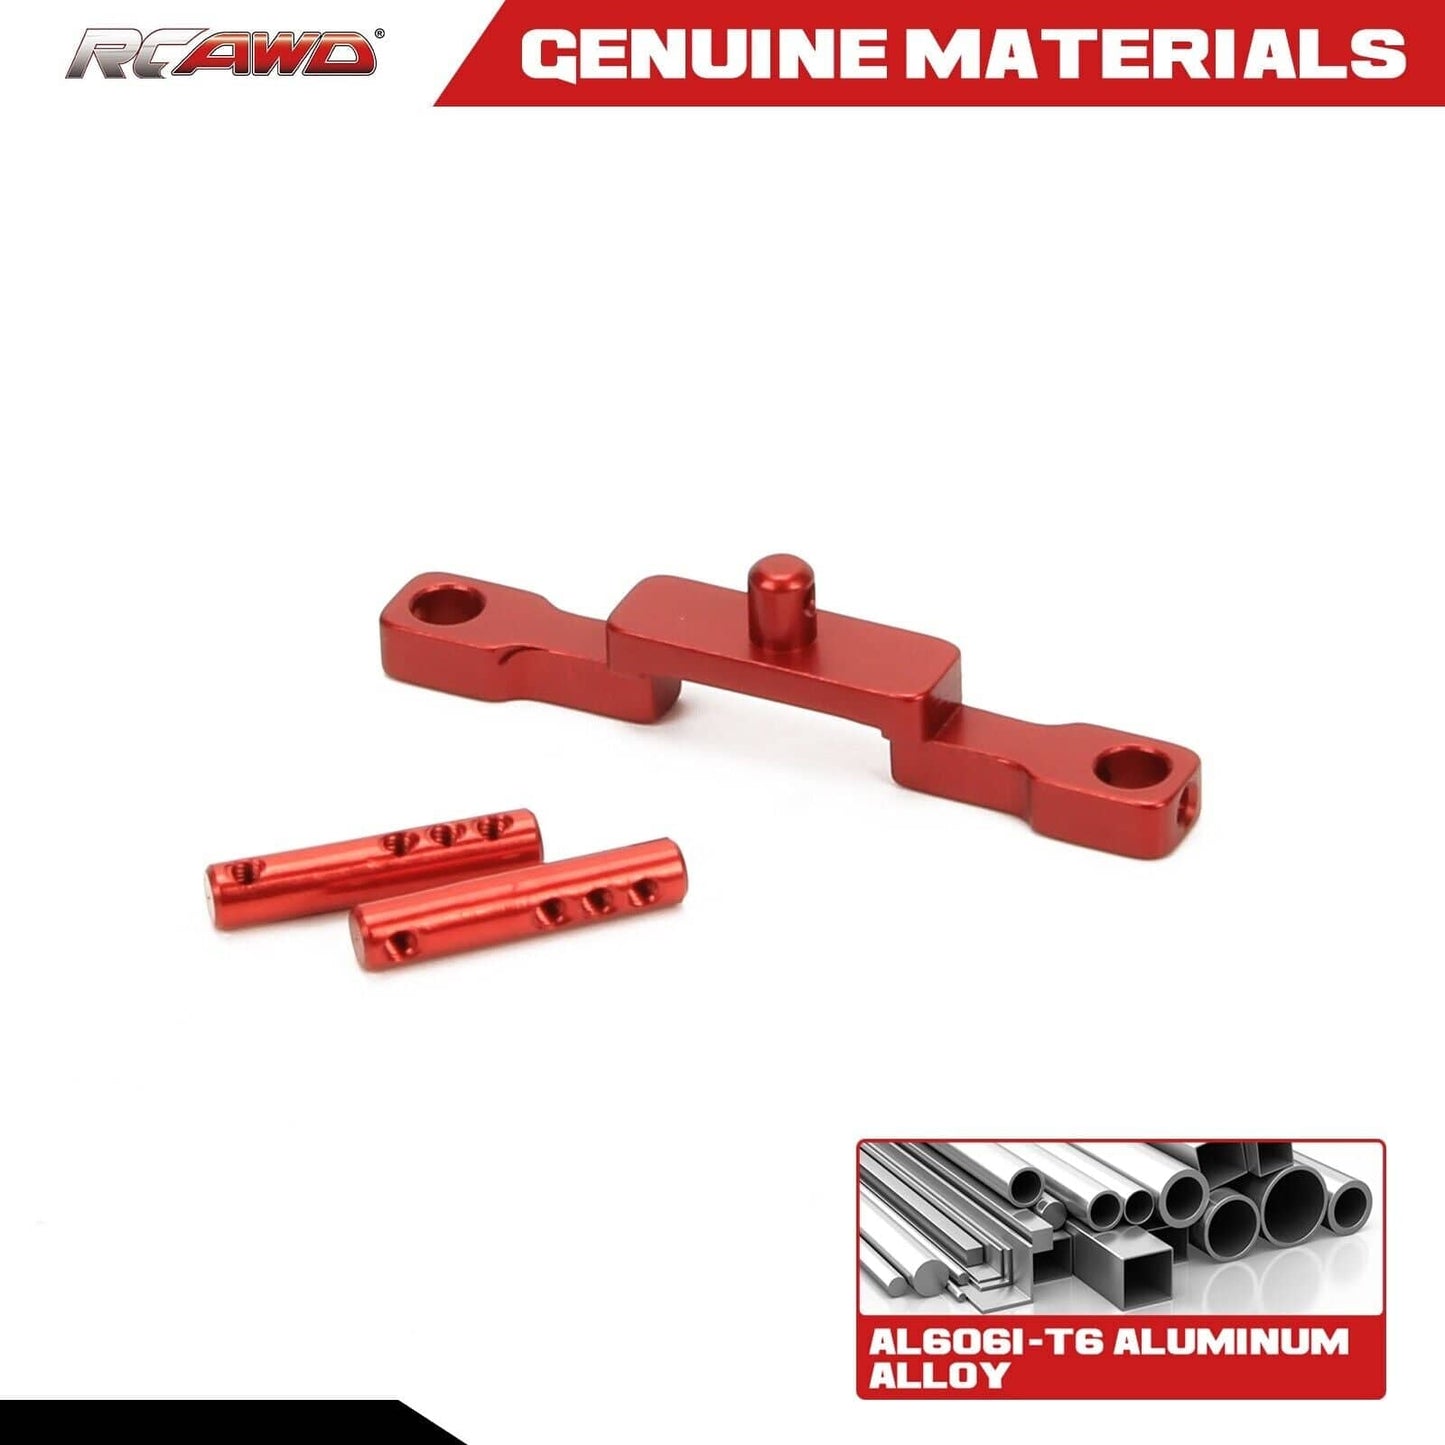 RCAWD Axial SCX24 Front Body Post Set Jeep Wrangler JLU CRC Crawlers -- RCAWD